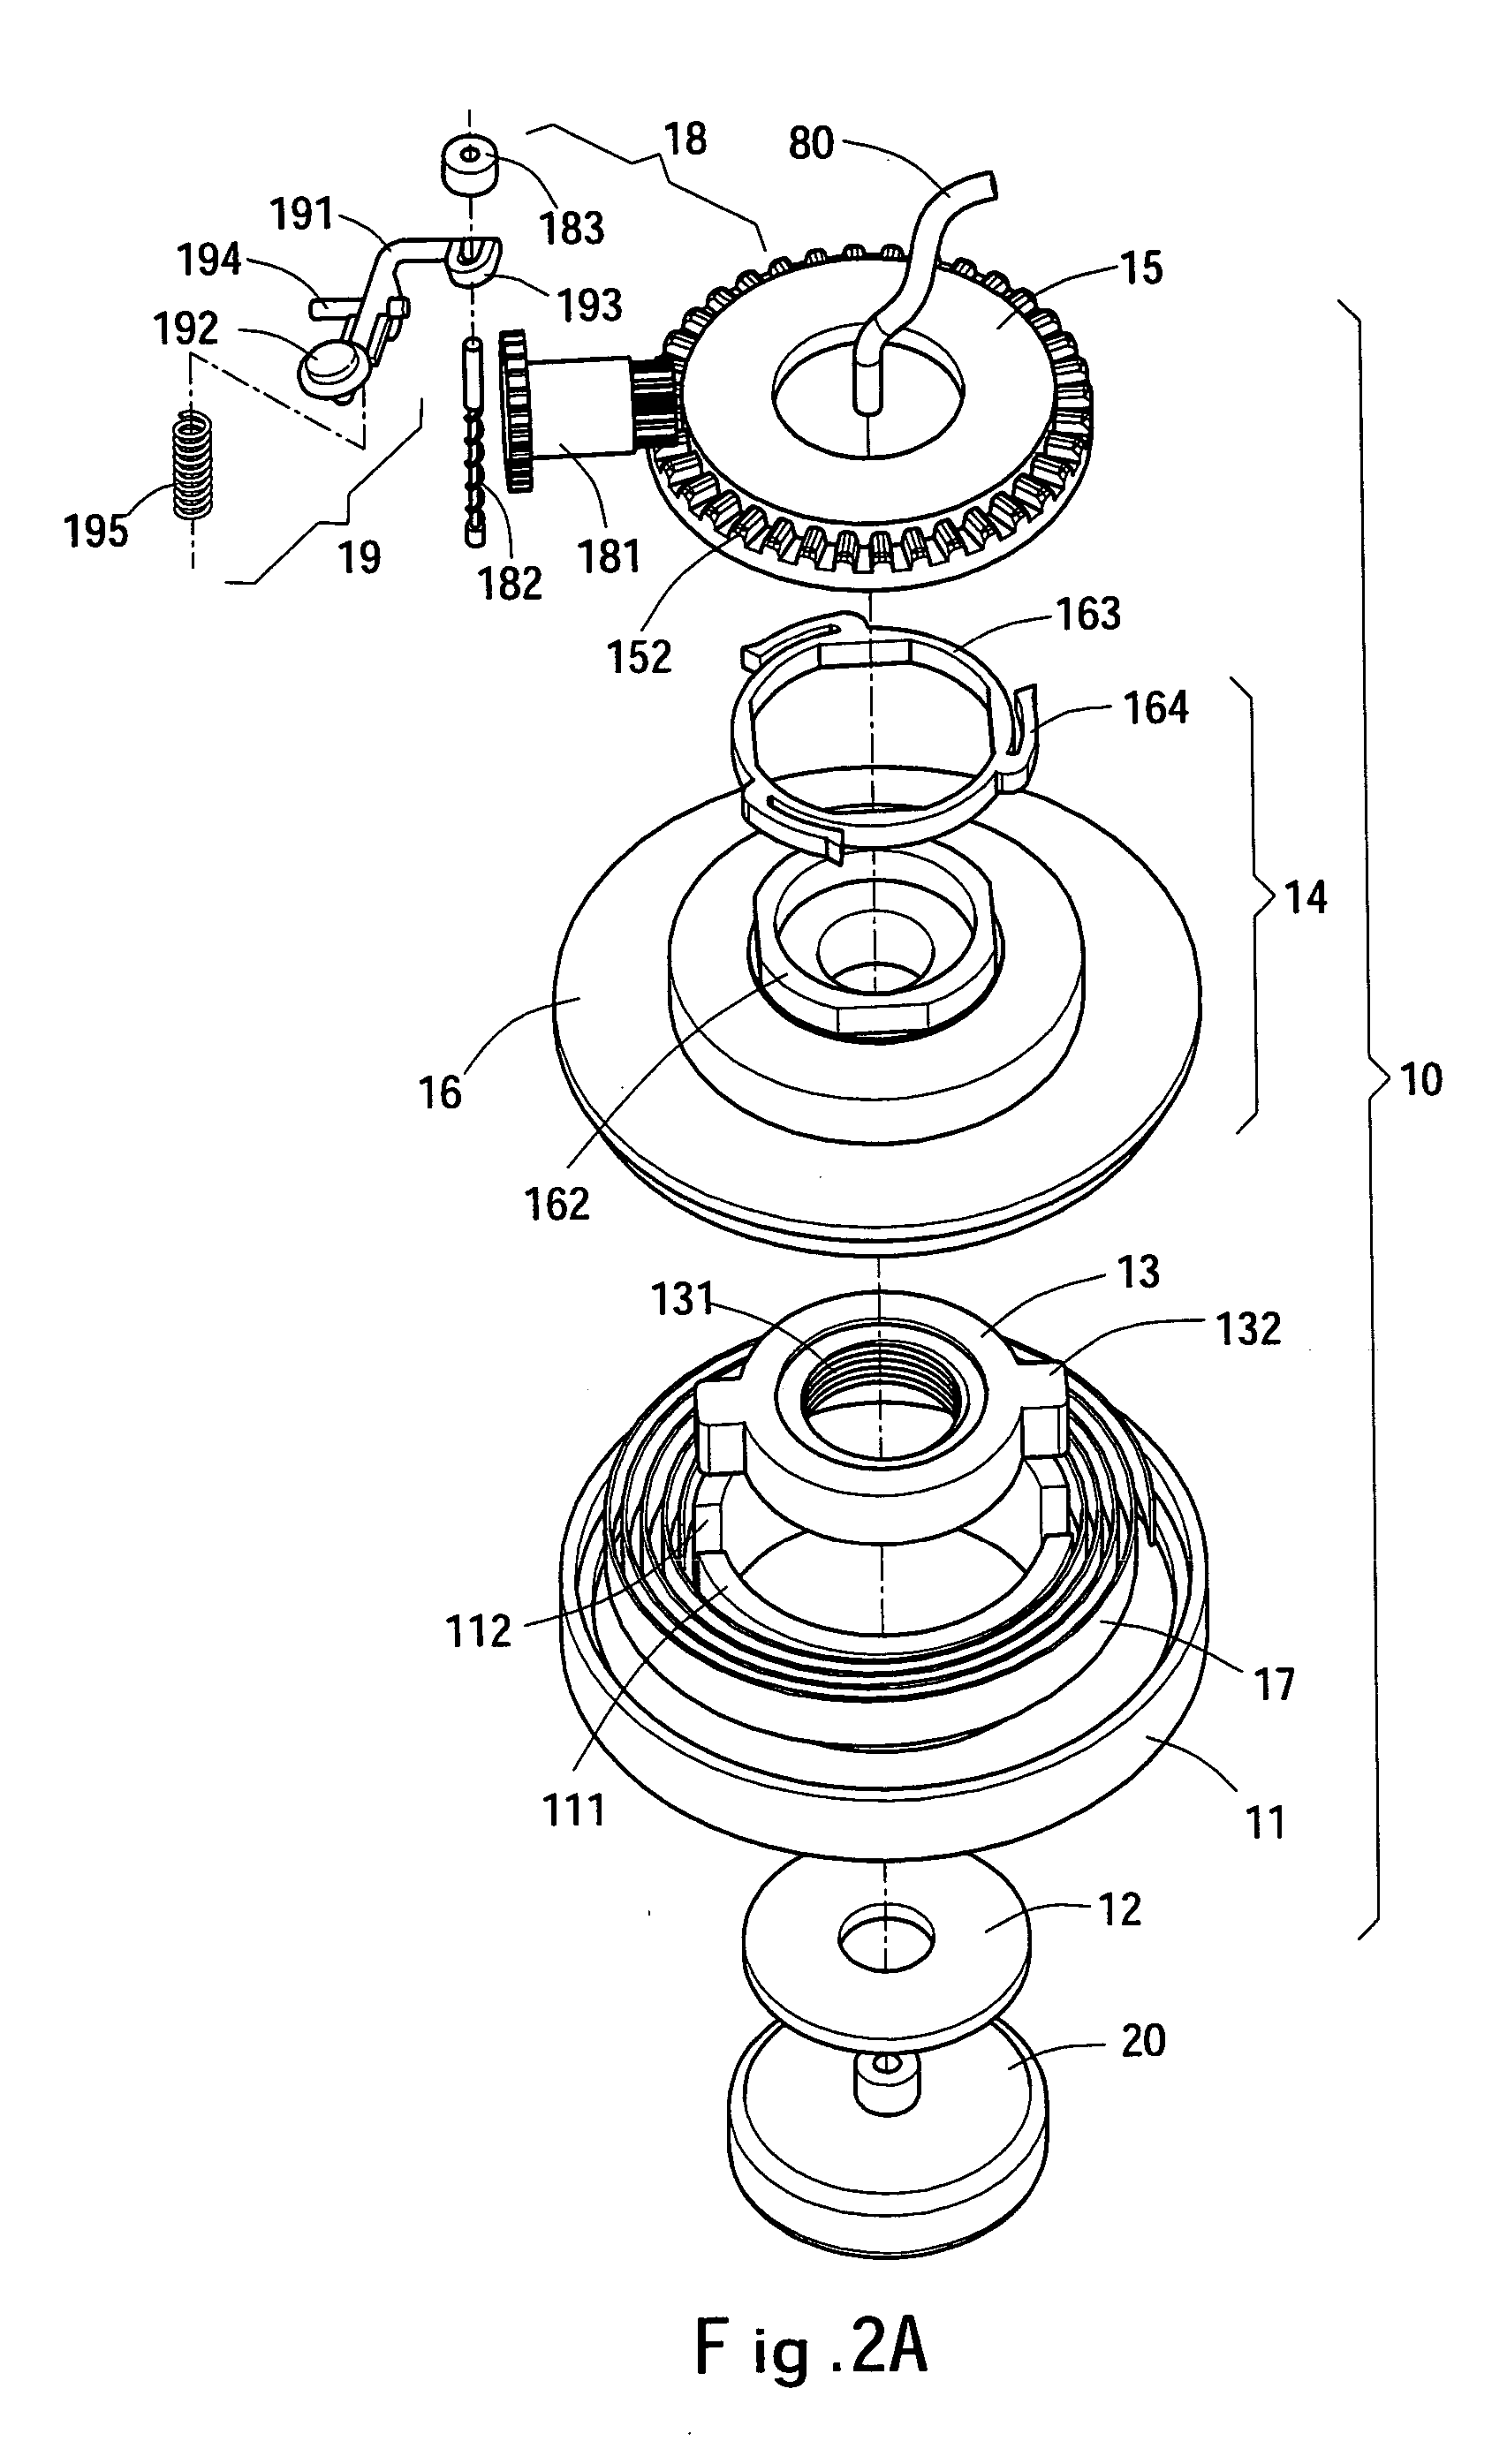 Method for measuring blood pressure and pulse rate with a pump-less mechanical compression apparatus